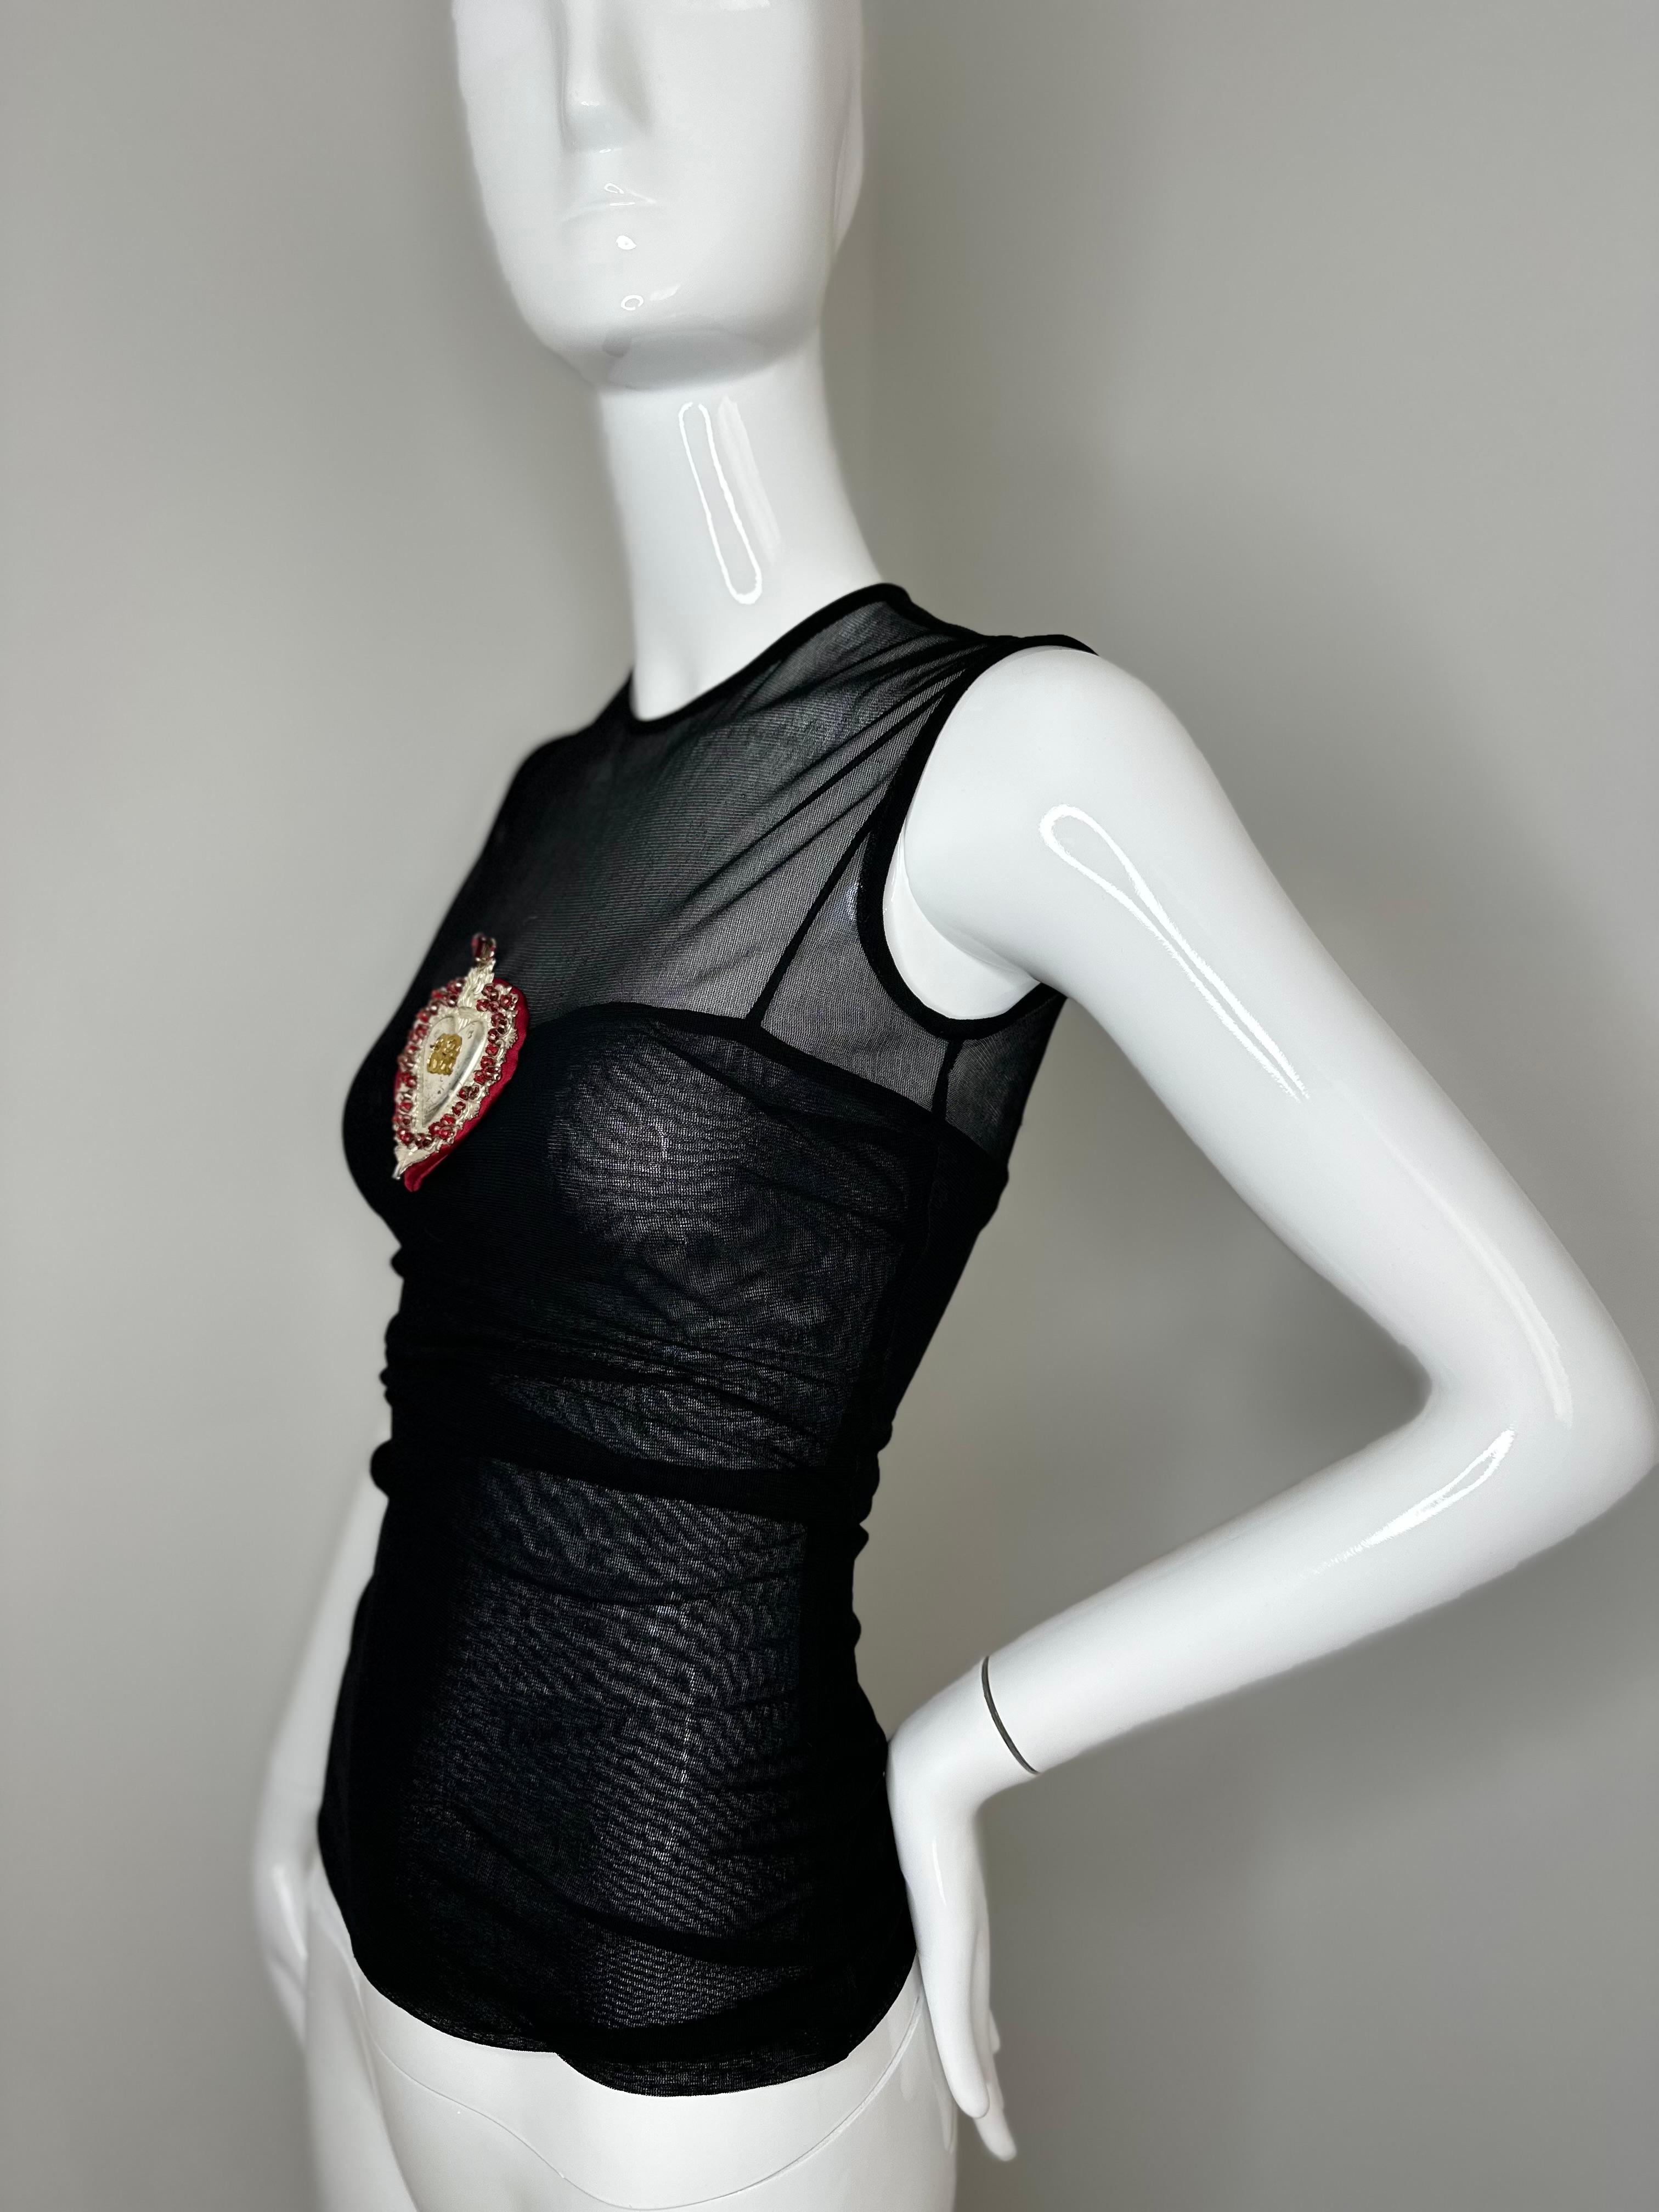 Dolce Gabbana 1998 Stromboli heart top In Good Condition For Sale In Annandale, VA